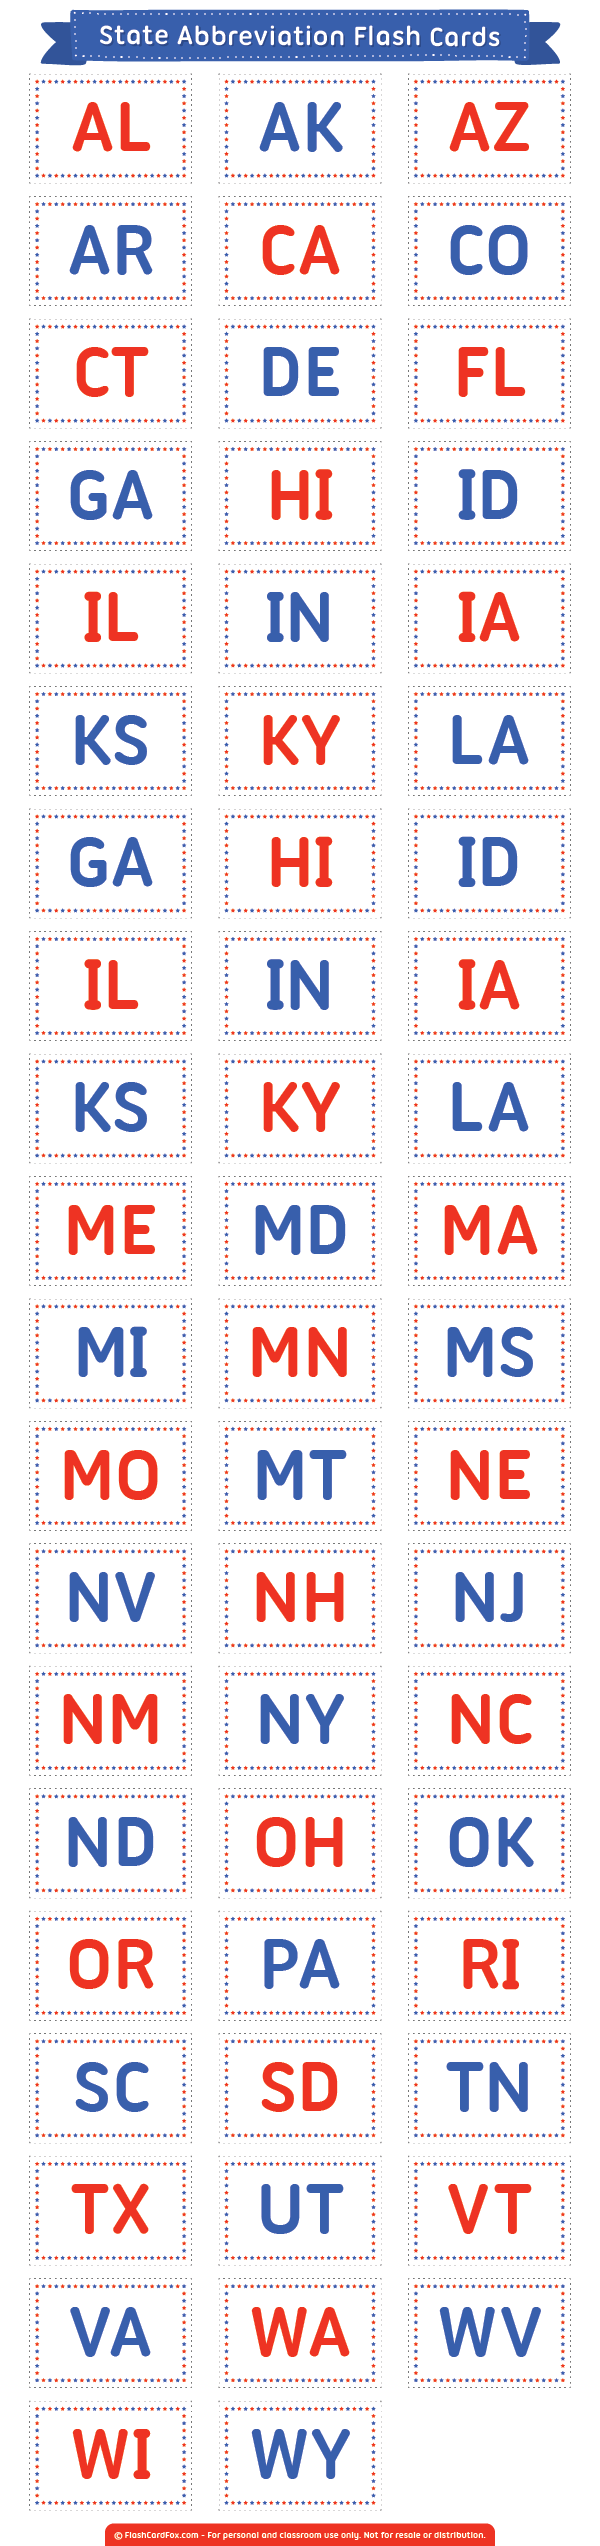 Printable State Abbreviation Flash Cards